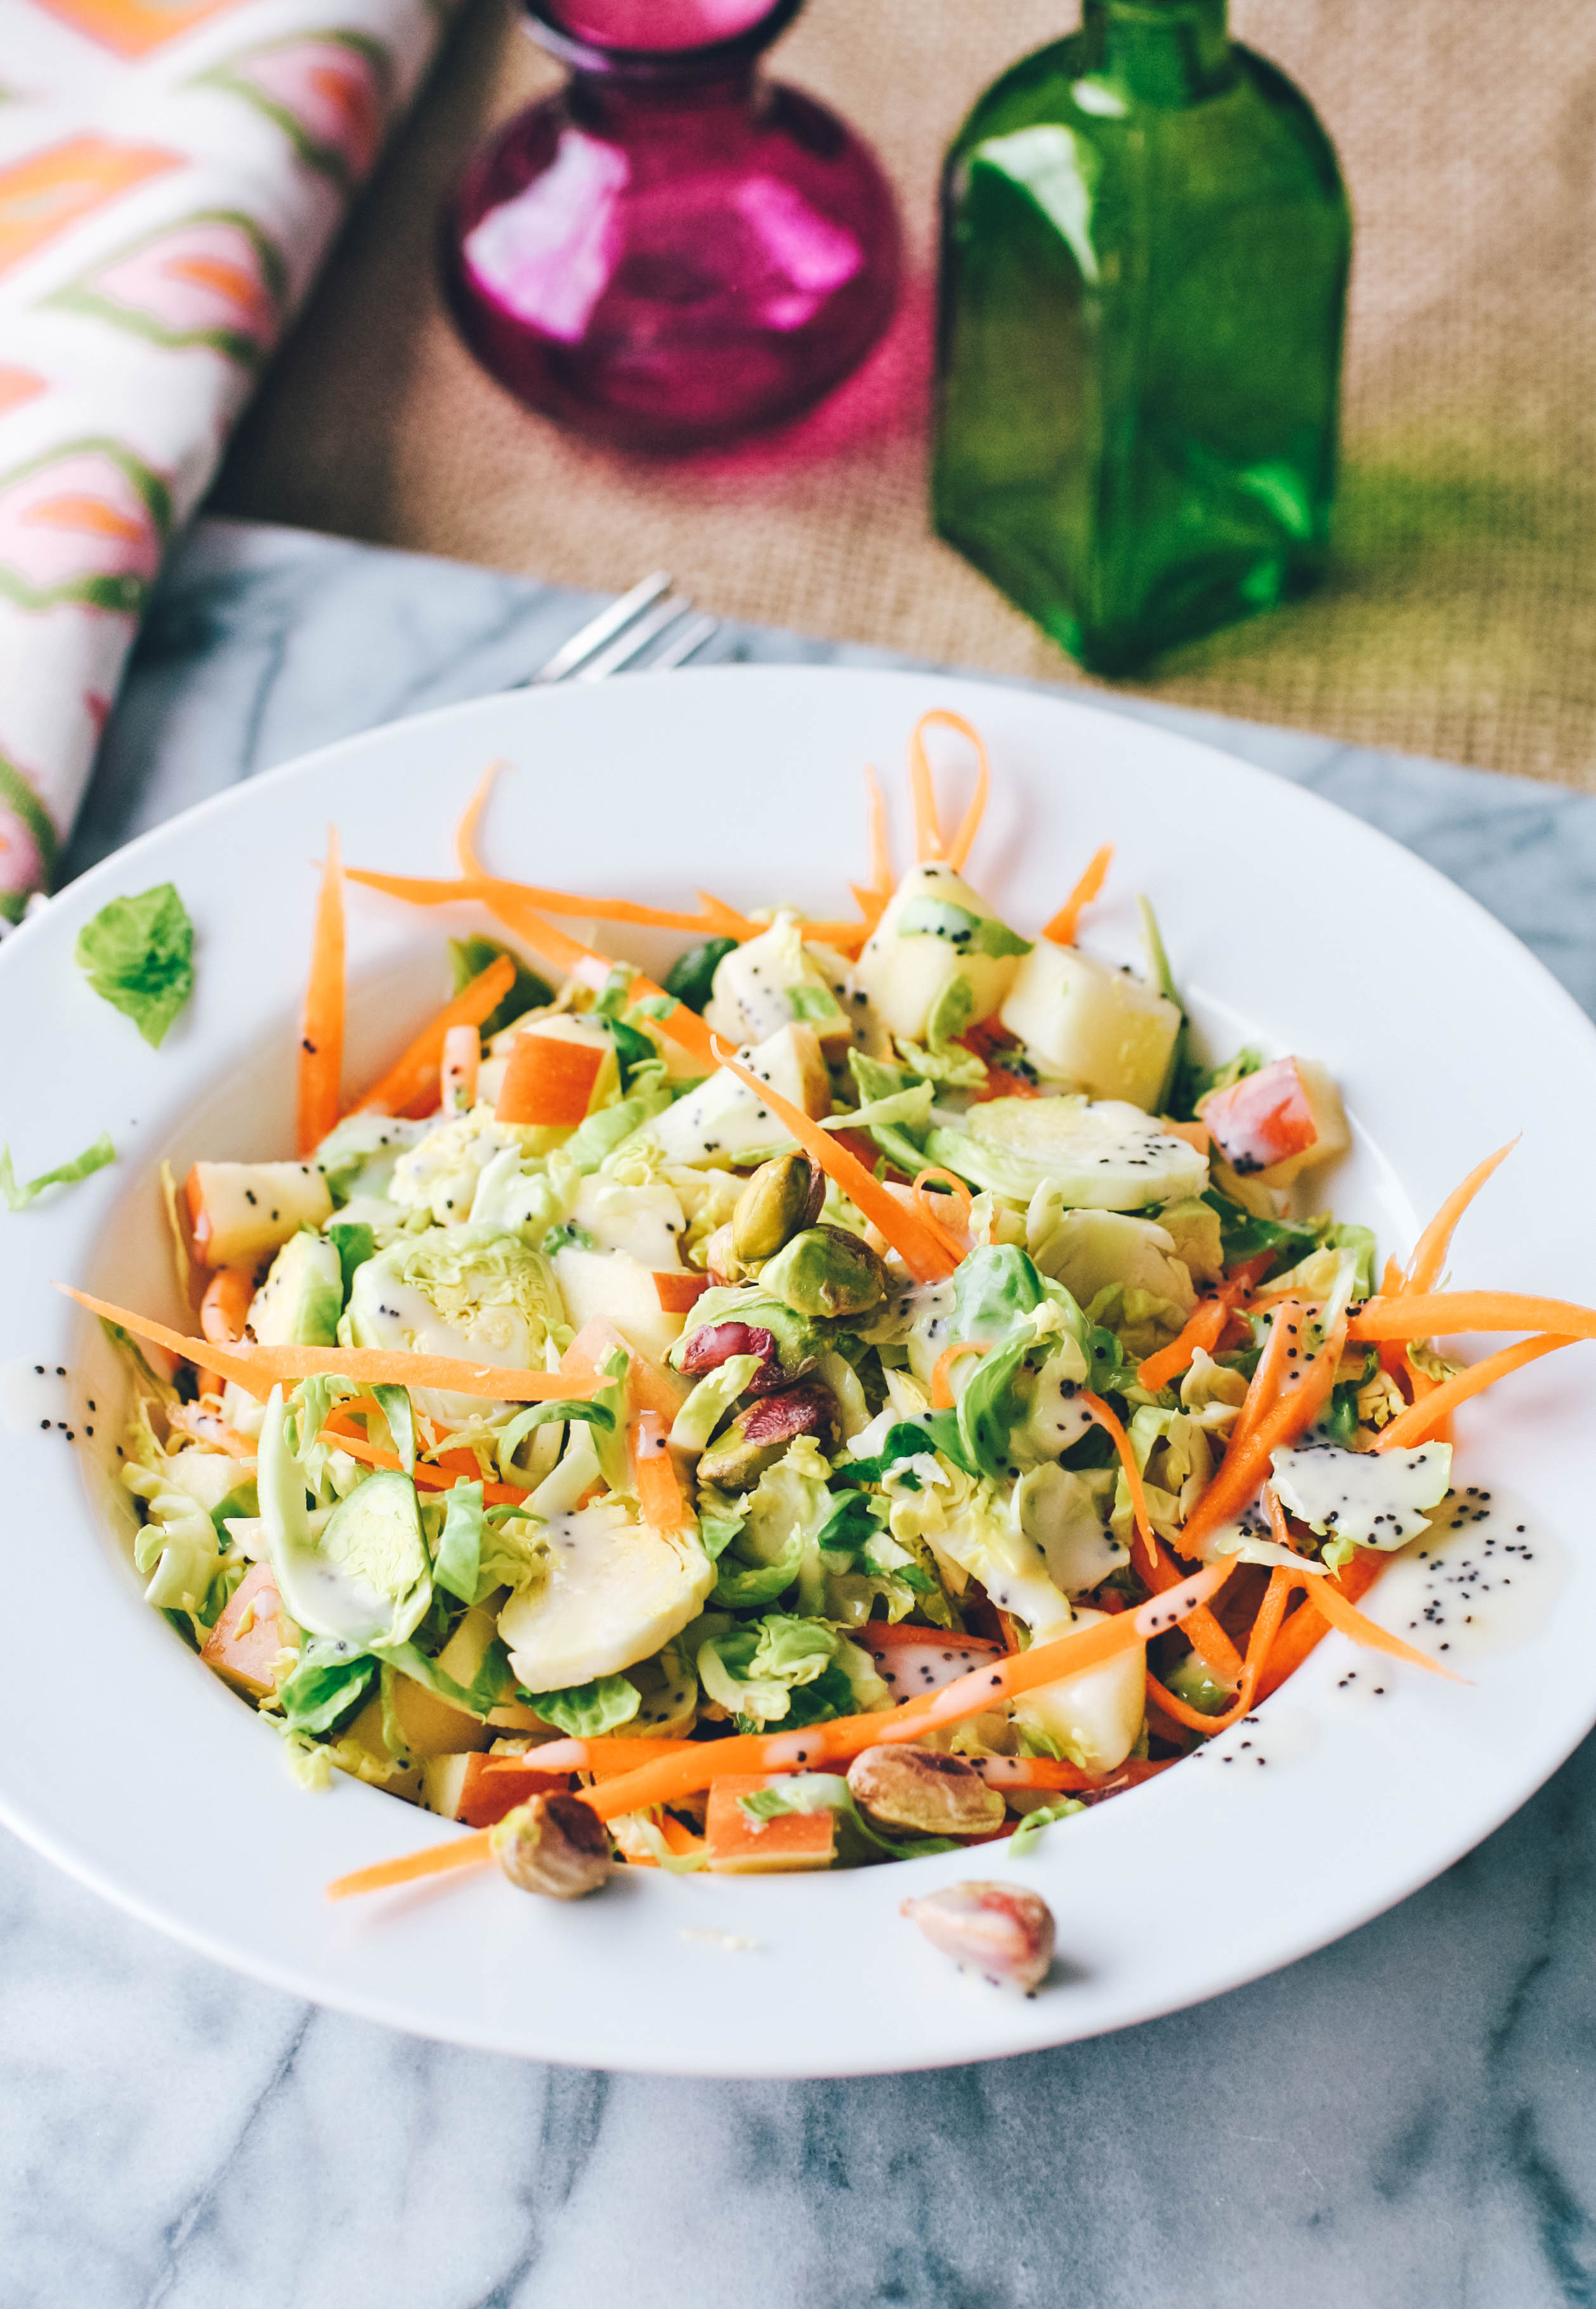 Brussels Sprouts Salad with Carrots, Apples, Pistachios & Poppy Seed Dressing is a hearty, winter salad. You'll enjoy this Brussels Sprouts Salad with Carrots, Apples, Pistachios & Poppy Seed Dressing.